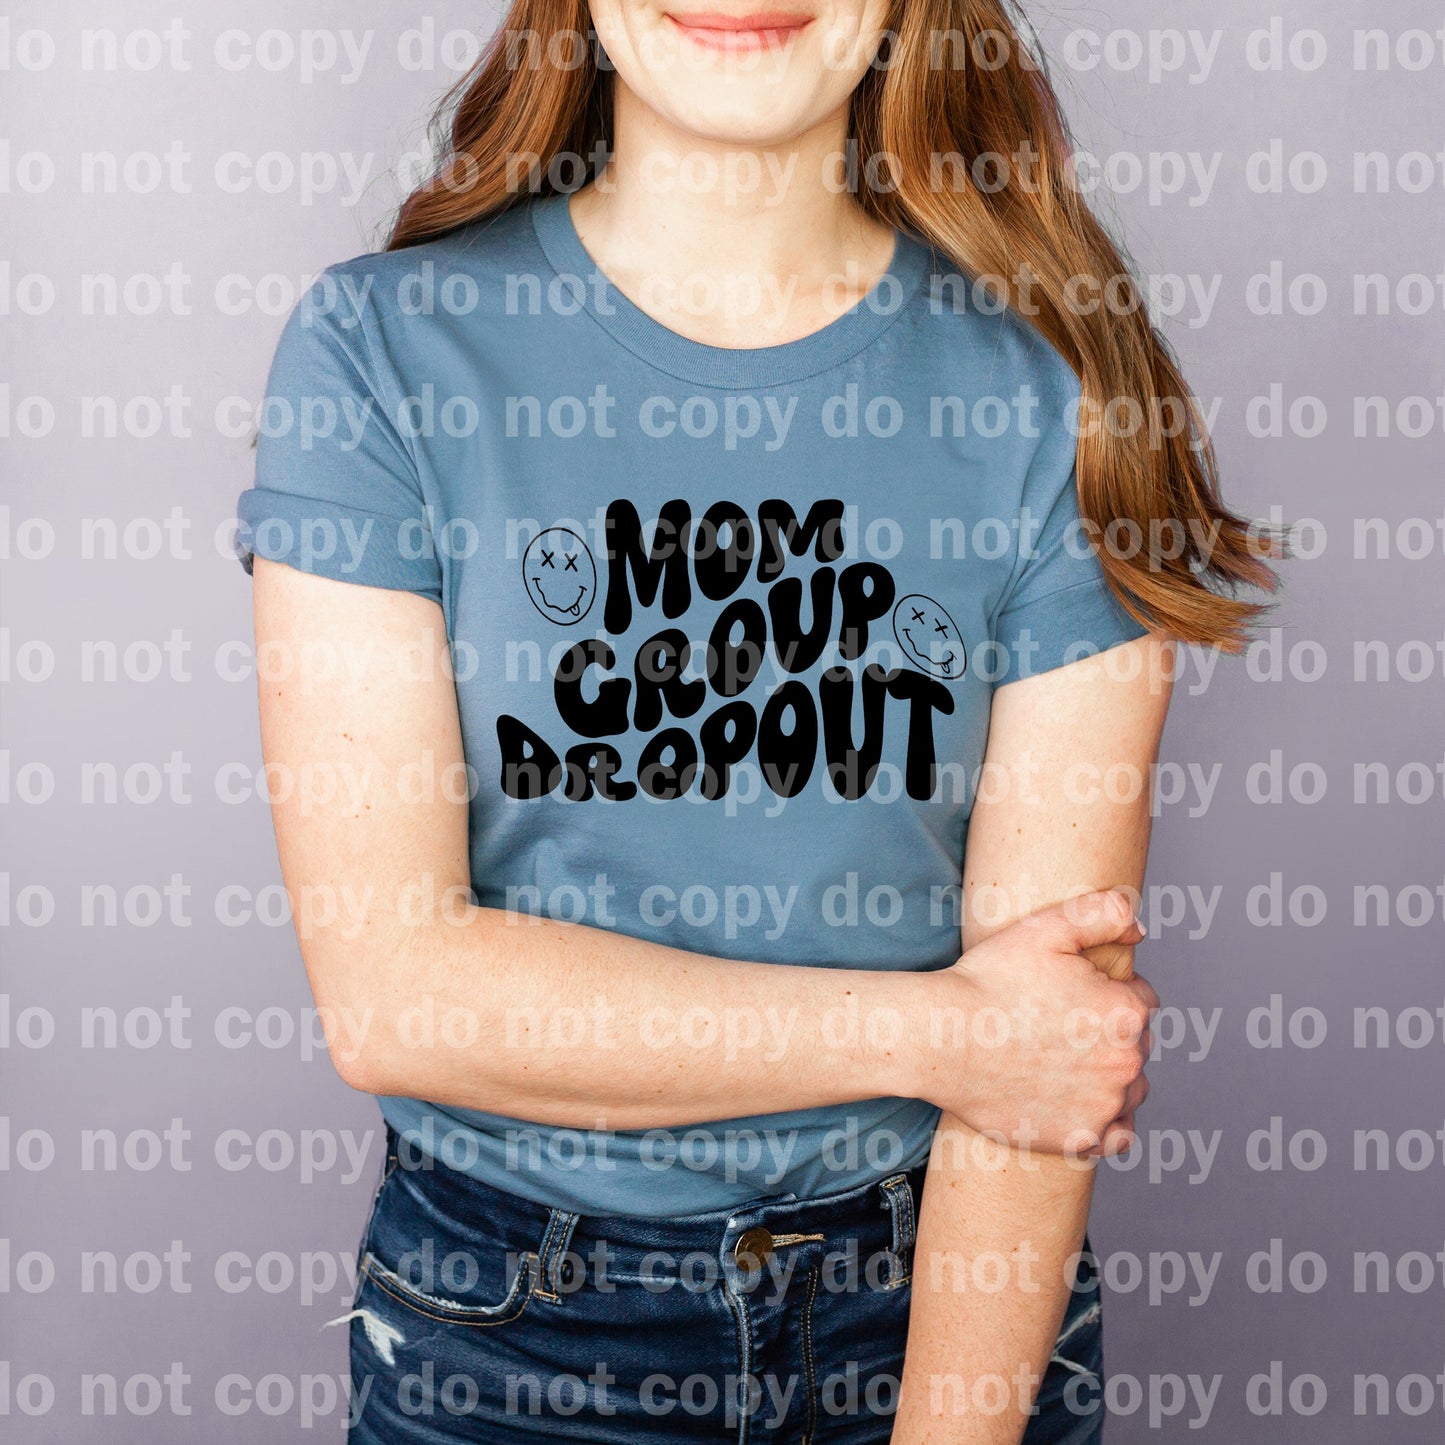 Mom Group Drop Out Black/Pink Dream Print or Sublimation Print